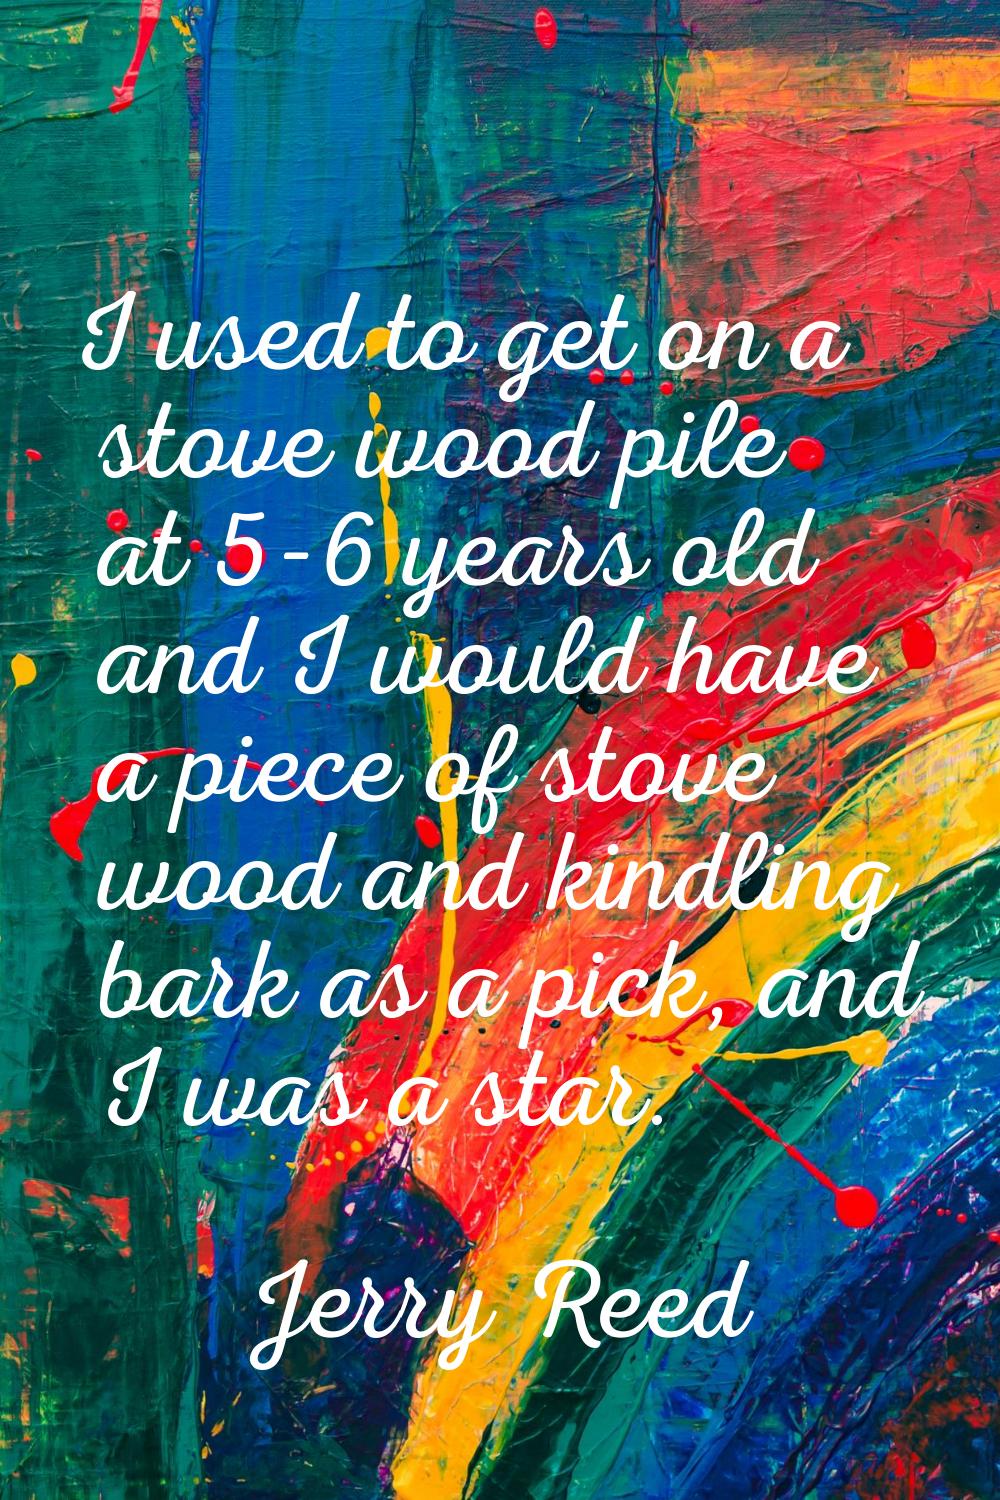 I used to get on a stove wood pile at 5-6 years old and I would have a piece of stove wood and kind